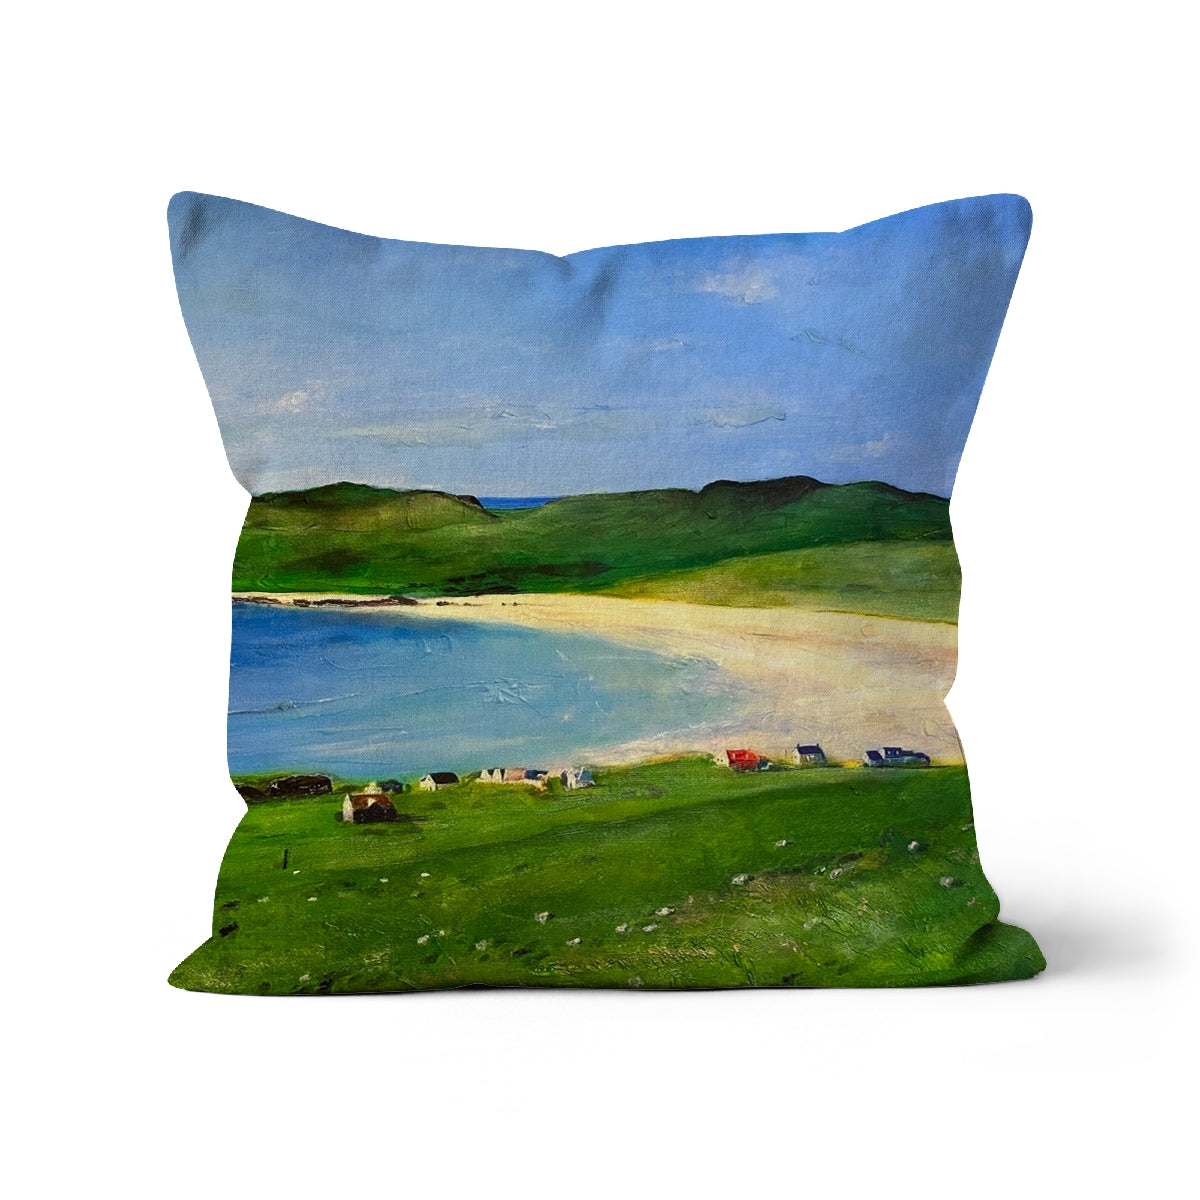 Balephuil Beach Tiree Art Gifts Cushion-Cushions-Hebridean Islands Art Gallery-Faux Suede-24"x24"-Paintings, Prints, Homeware, Art Gifts From Scotland By Scottish Artist Kevin Hunter